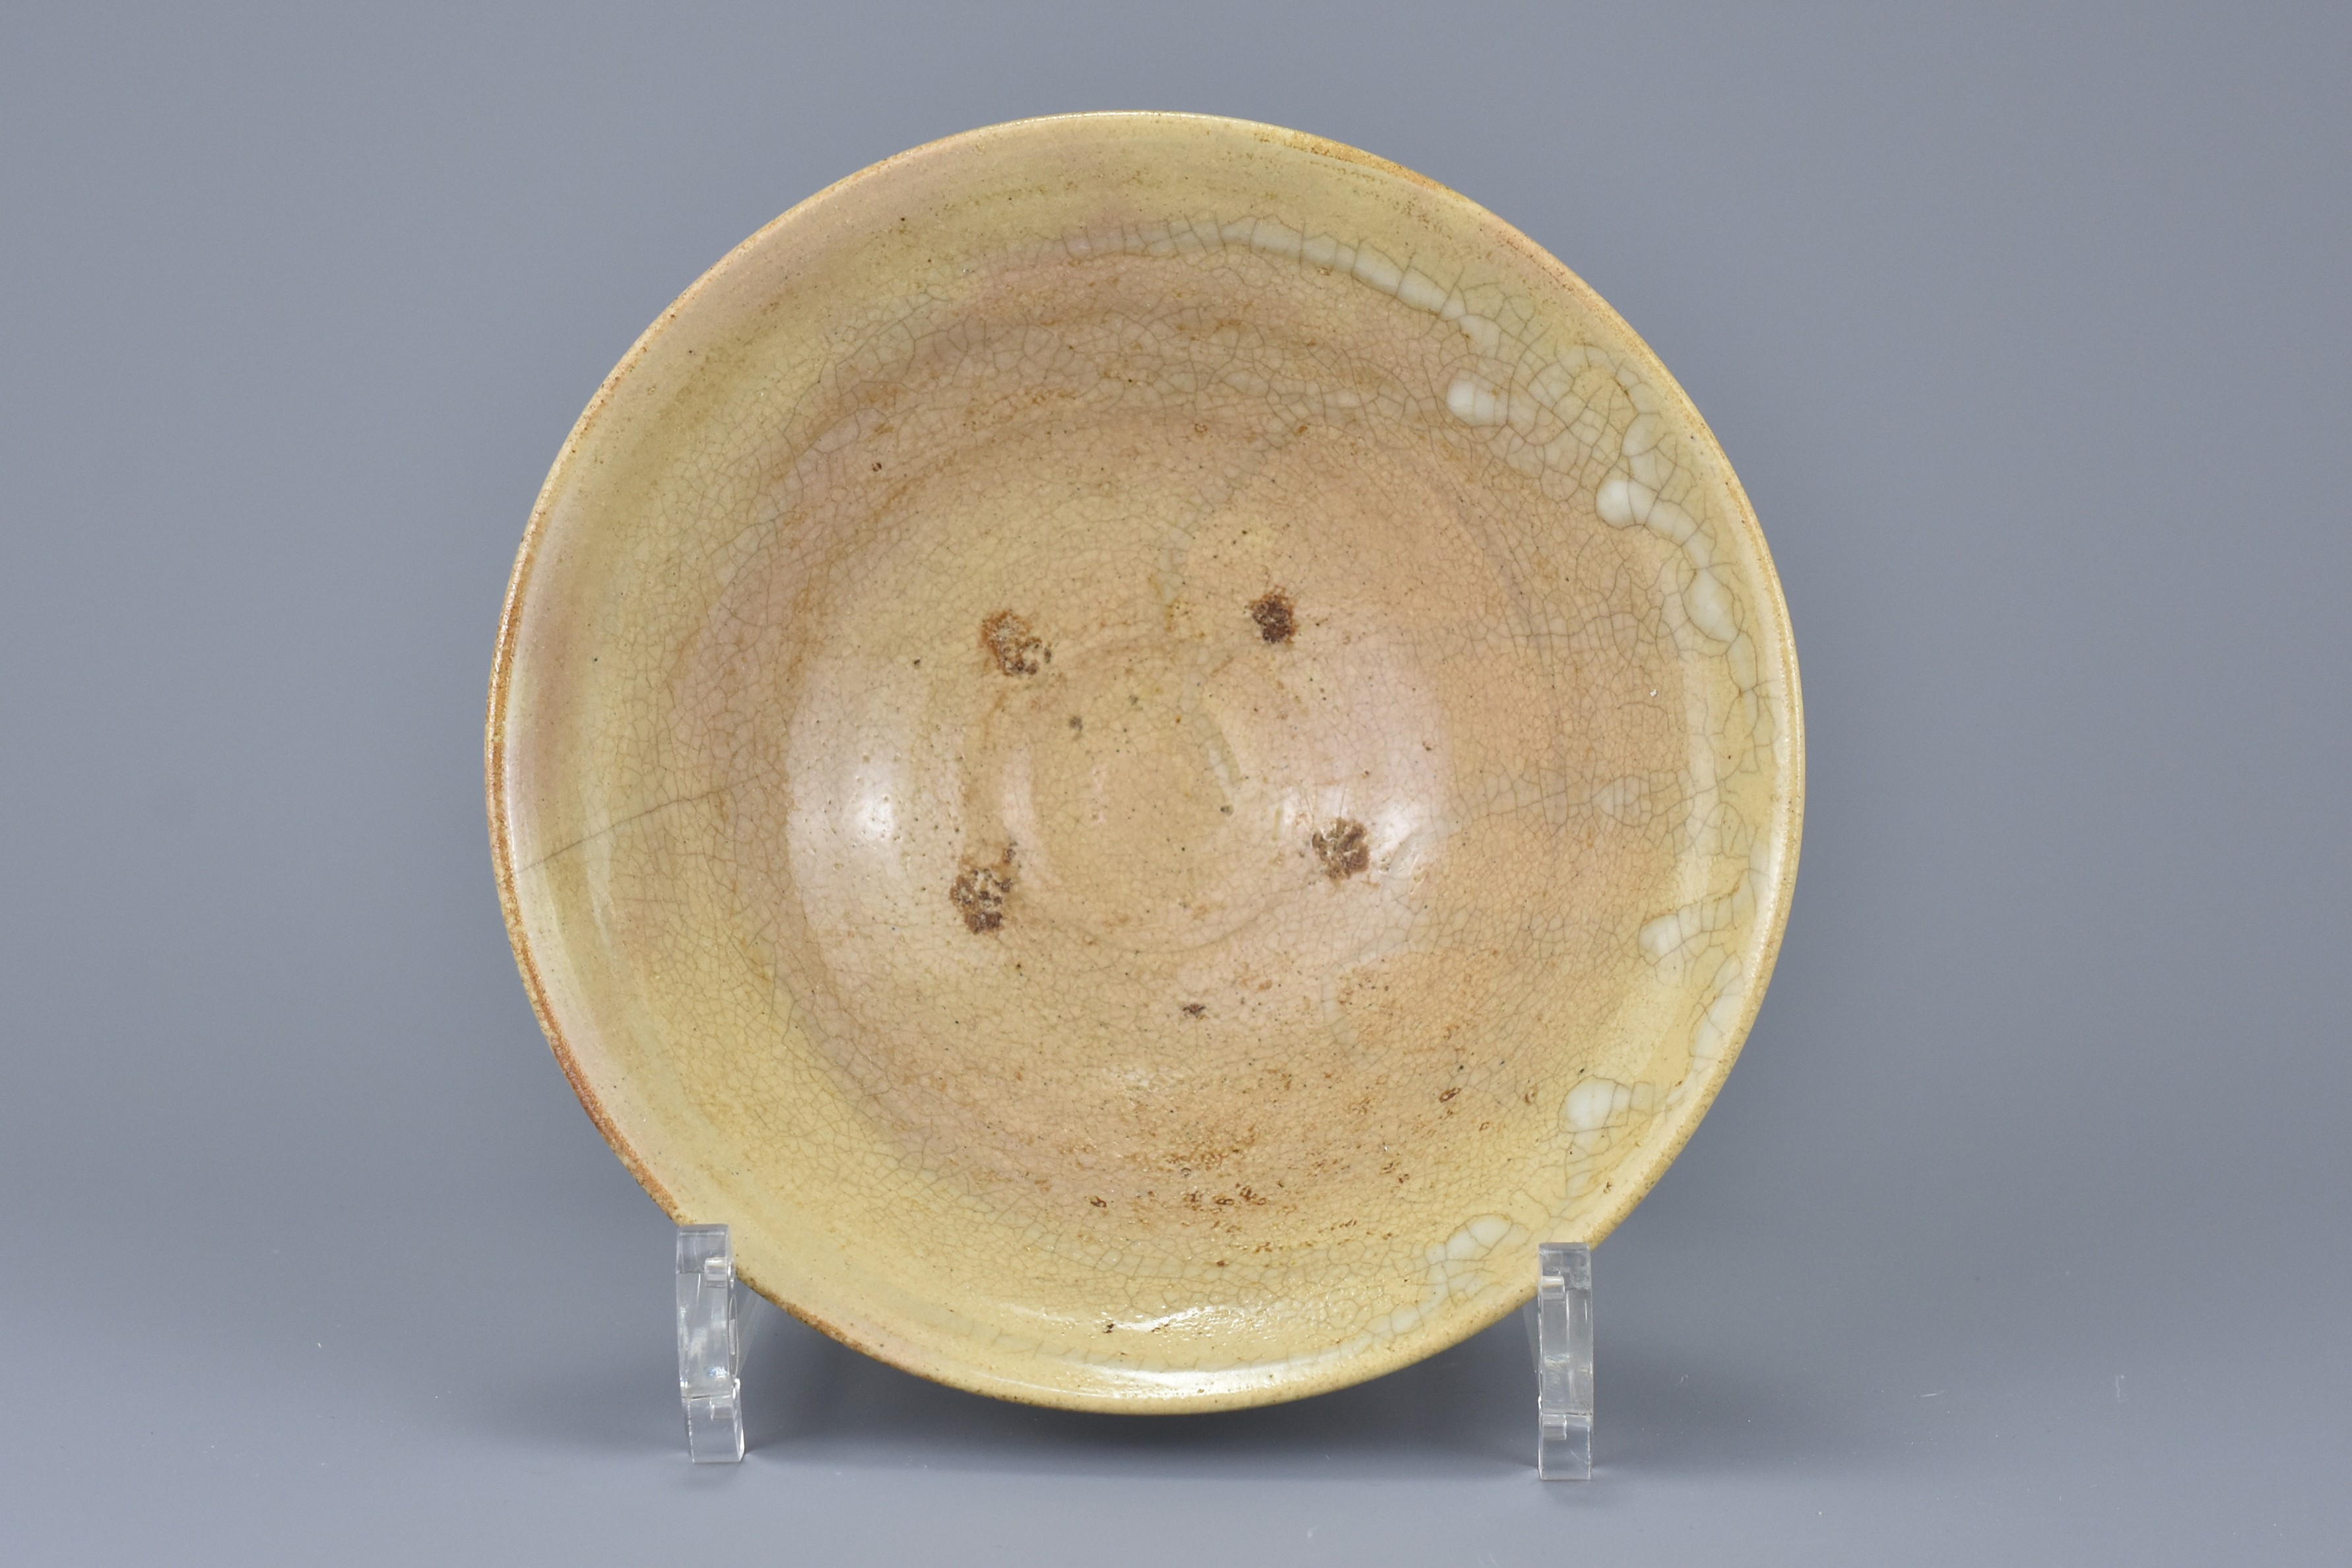 A Japanese or Korean Glazed Stoneware Bowl of Conical Form, 19th Century - Image 2 of 8